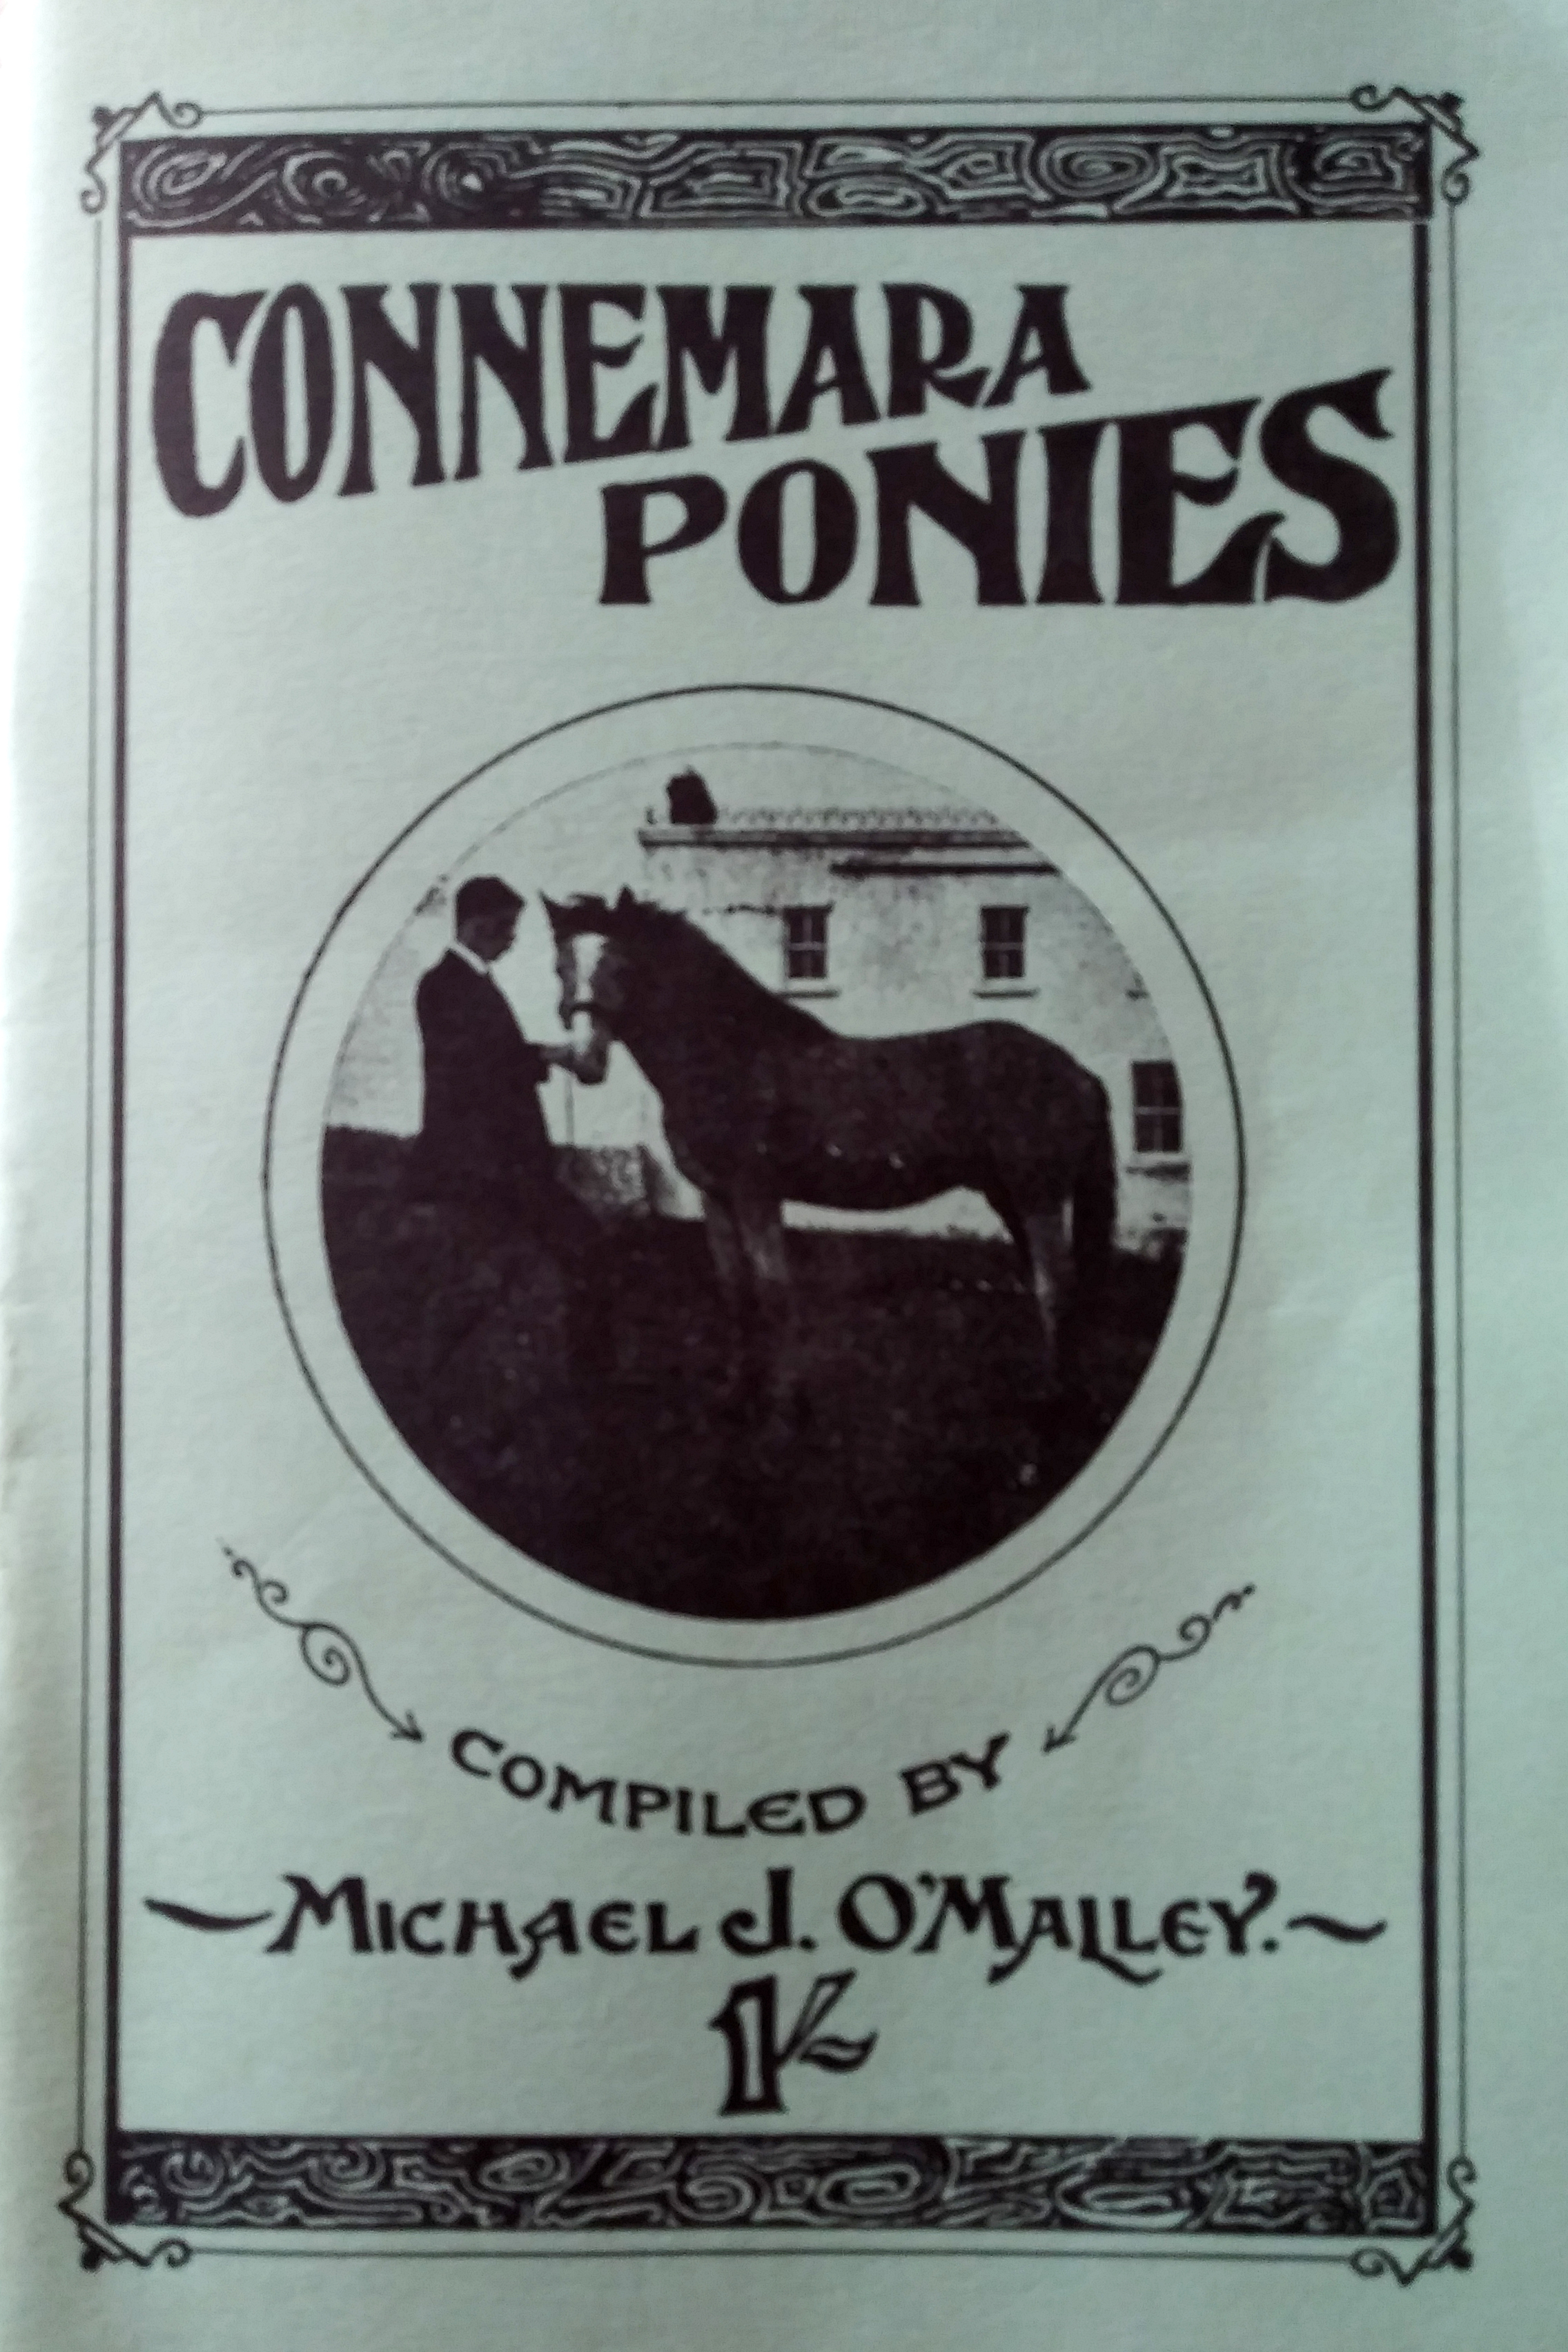 Connemara Ponies, a booklet compiled by Michael J. O'Malley.